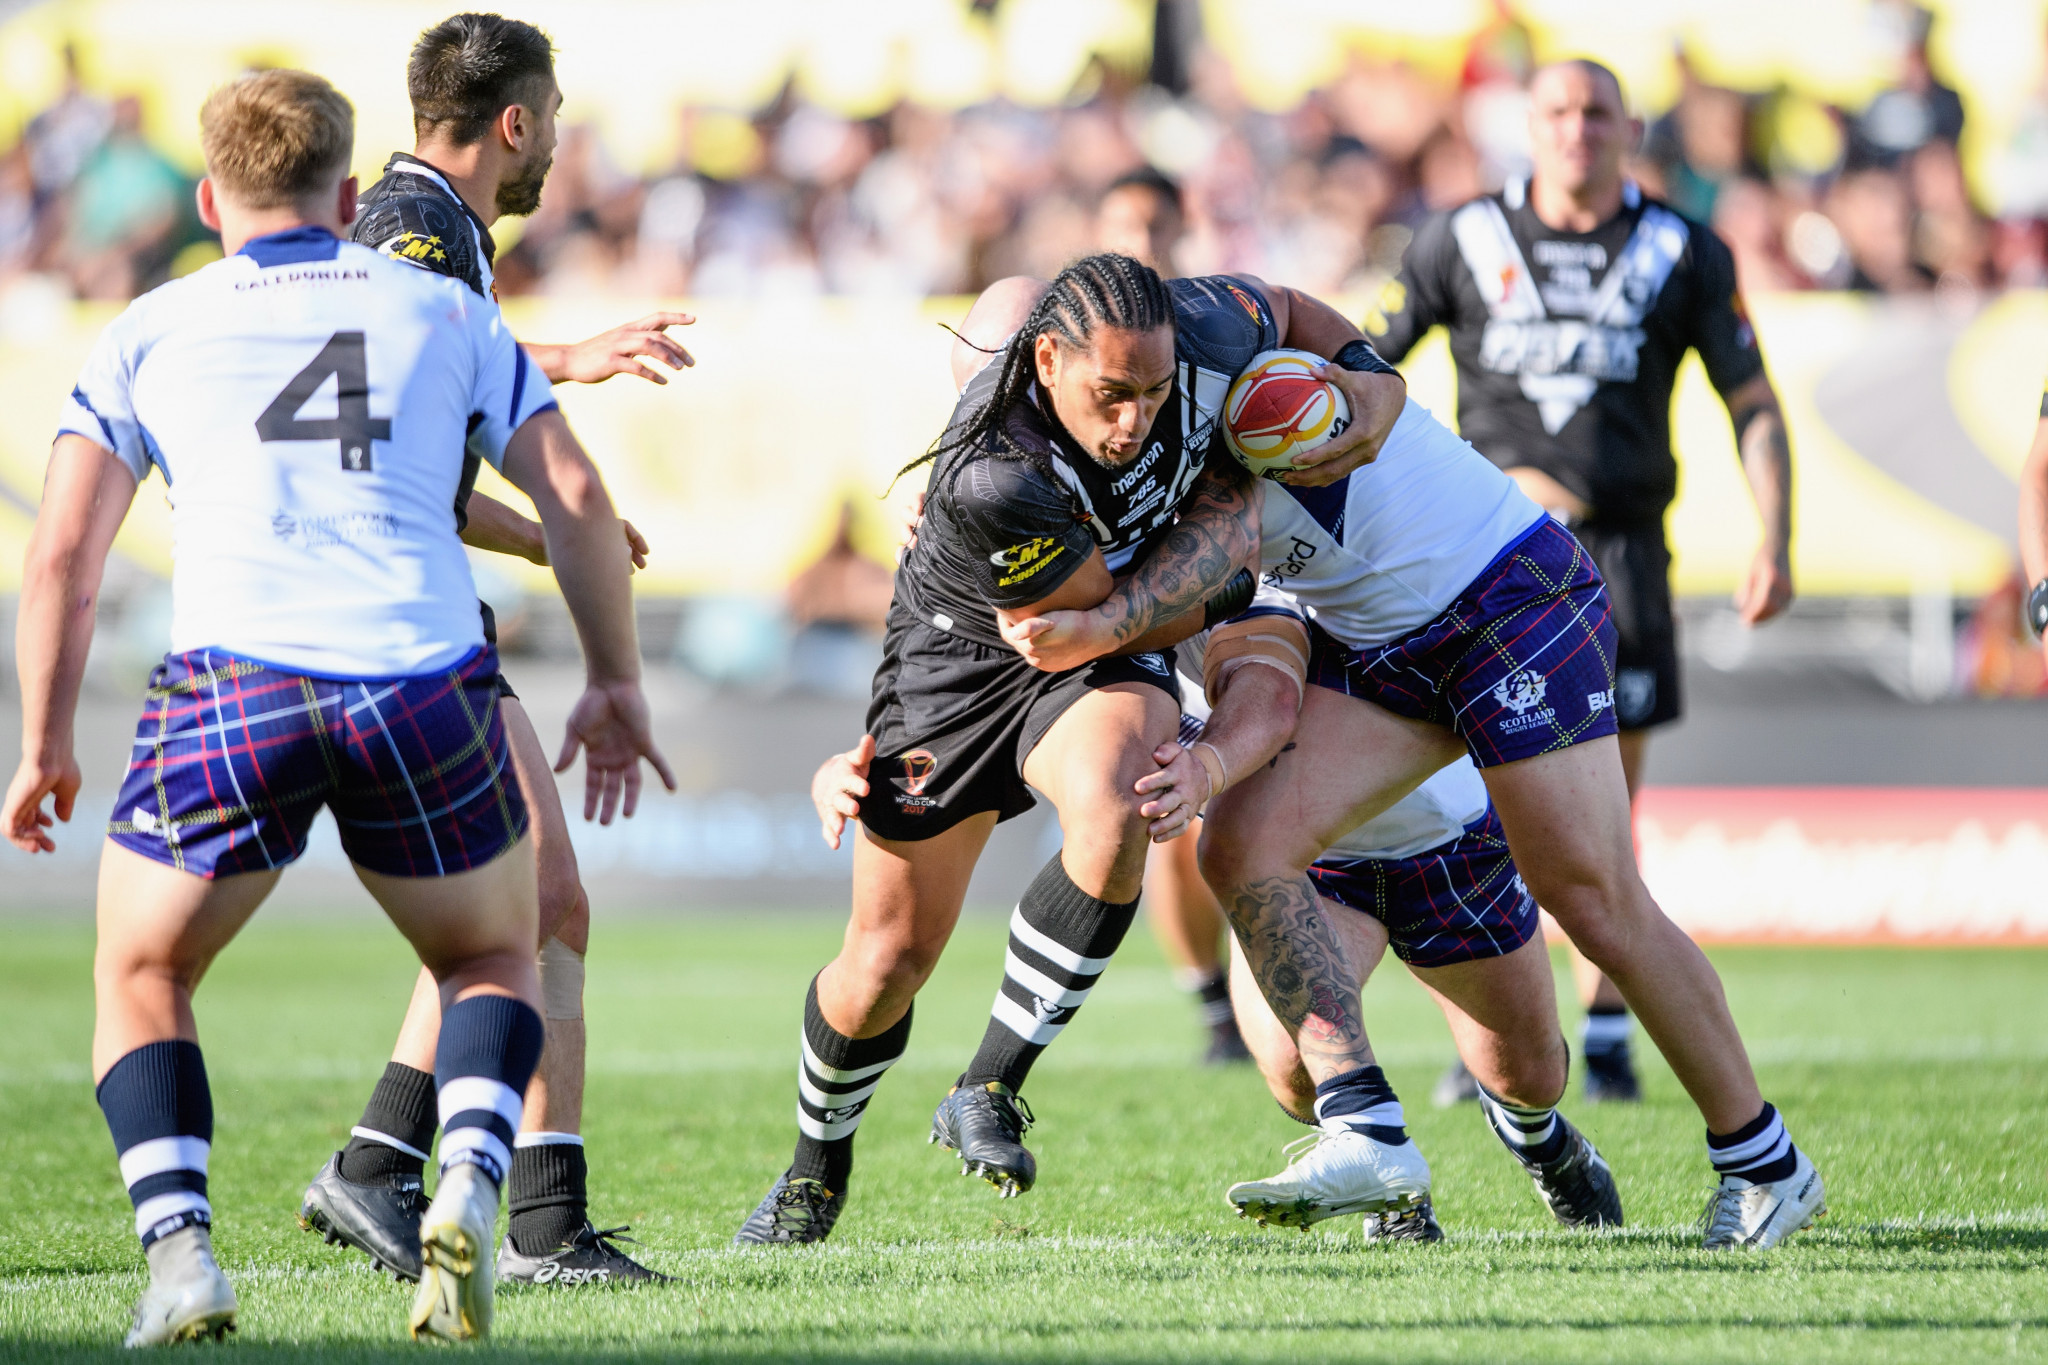 Martin Taupau of the Kiwis is tackled by Dale Ferguson of Scotland during today's World Cup match between the New Zealand Kiwis and Scotland in Christchurch, New Zealand ©Getty Images